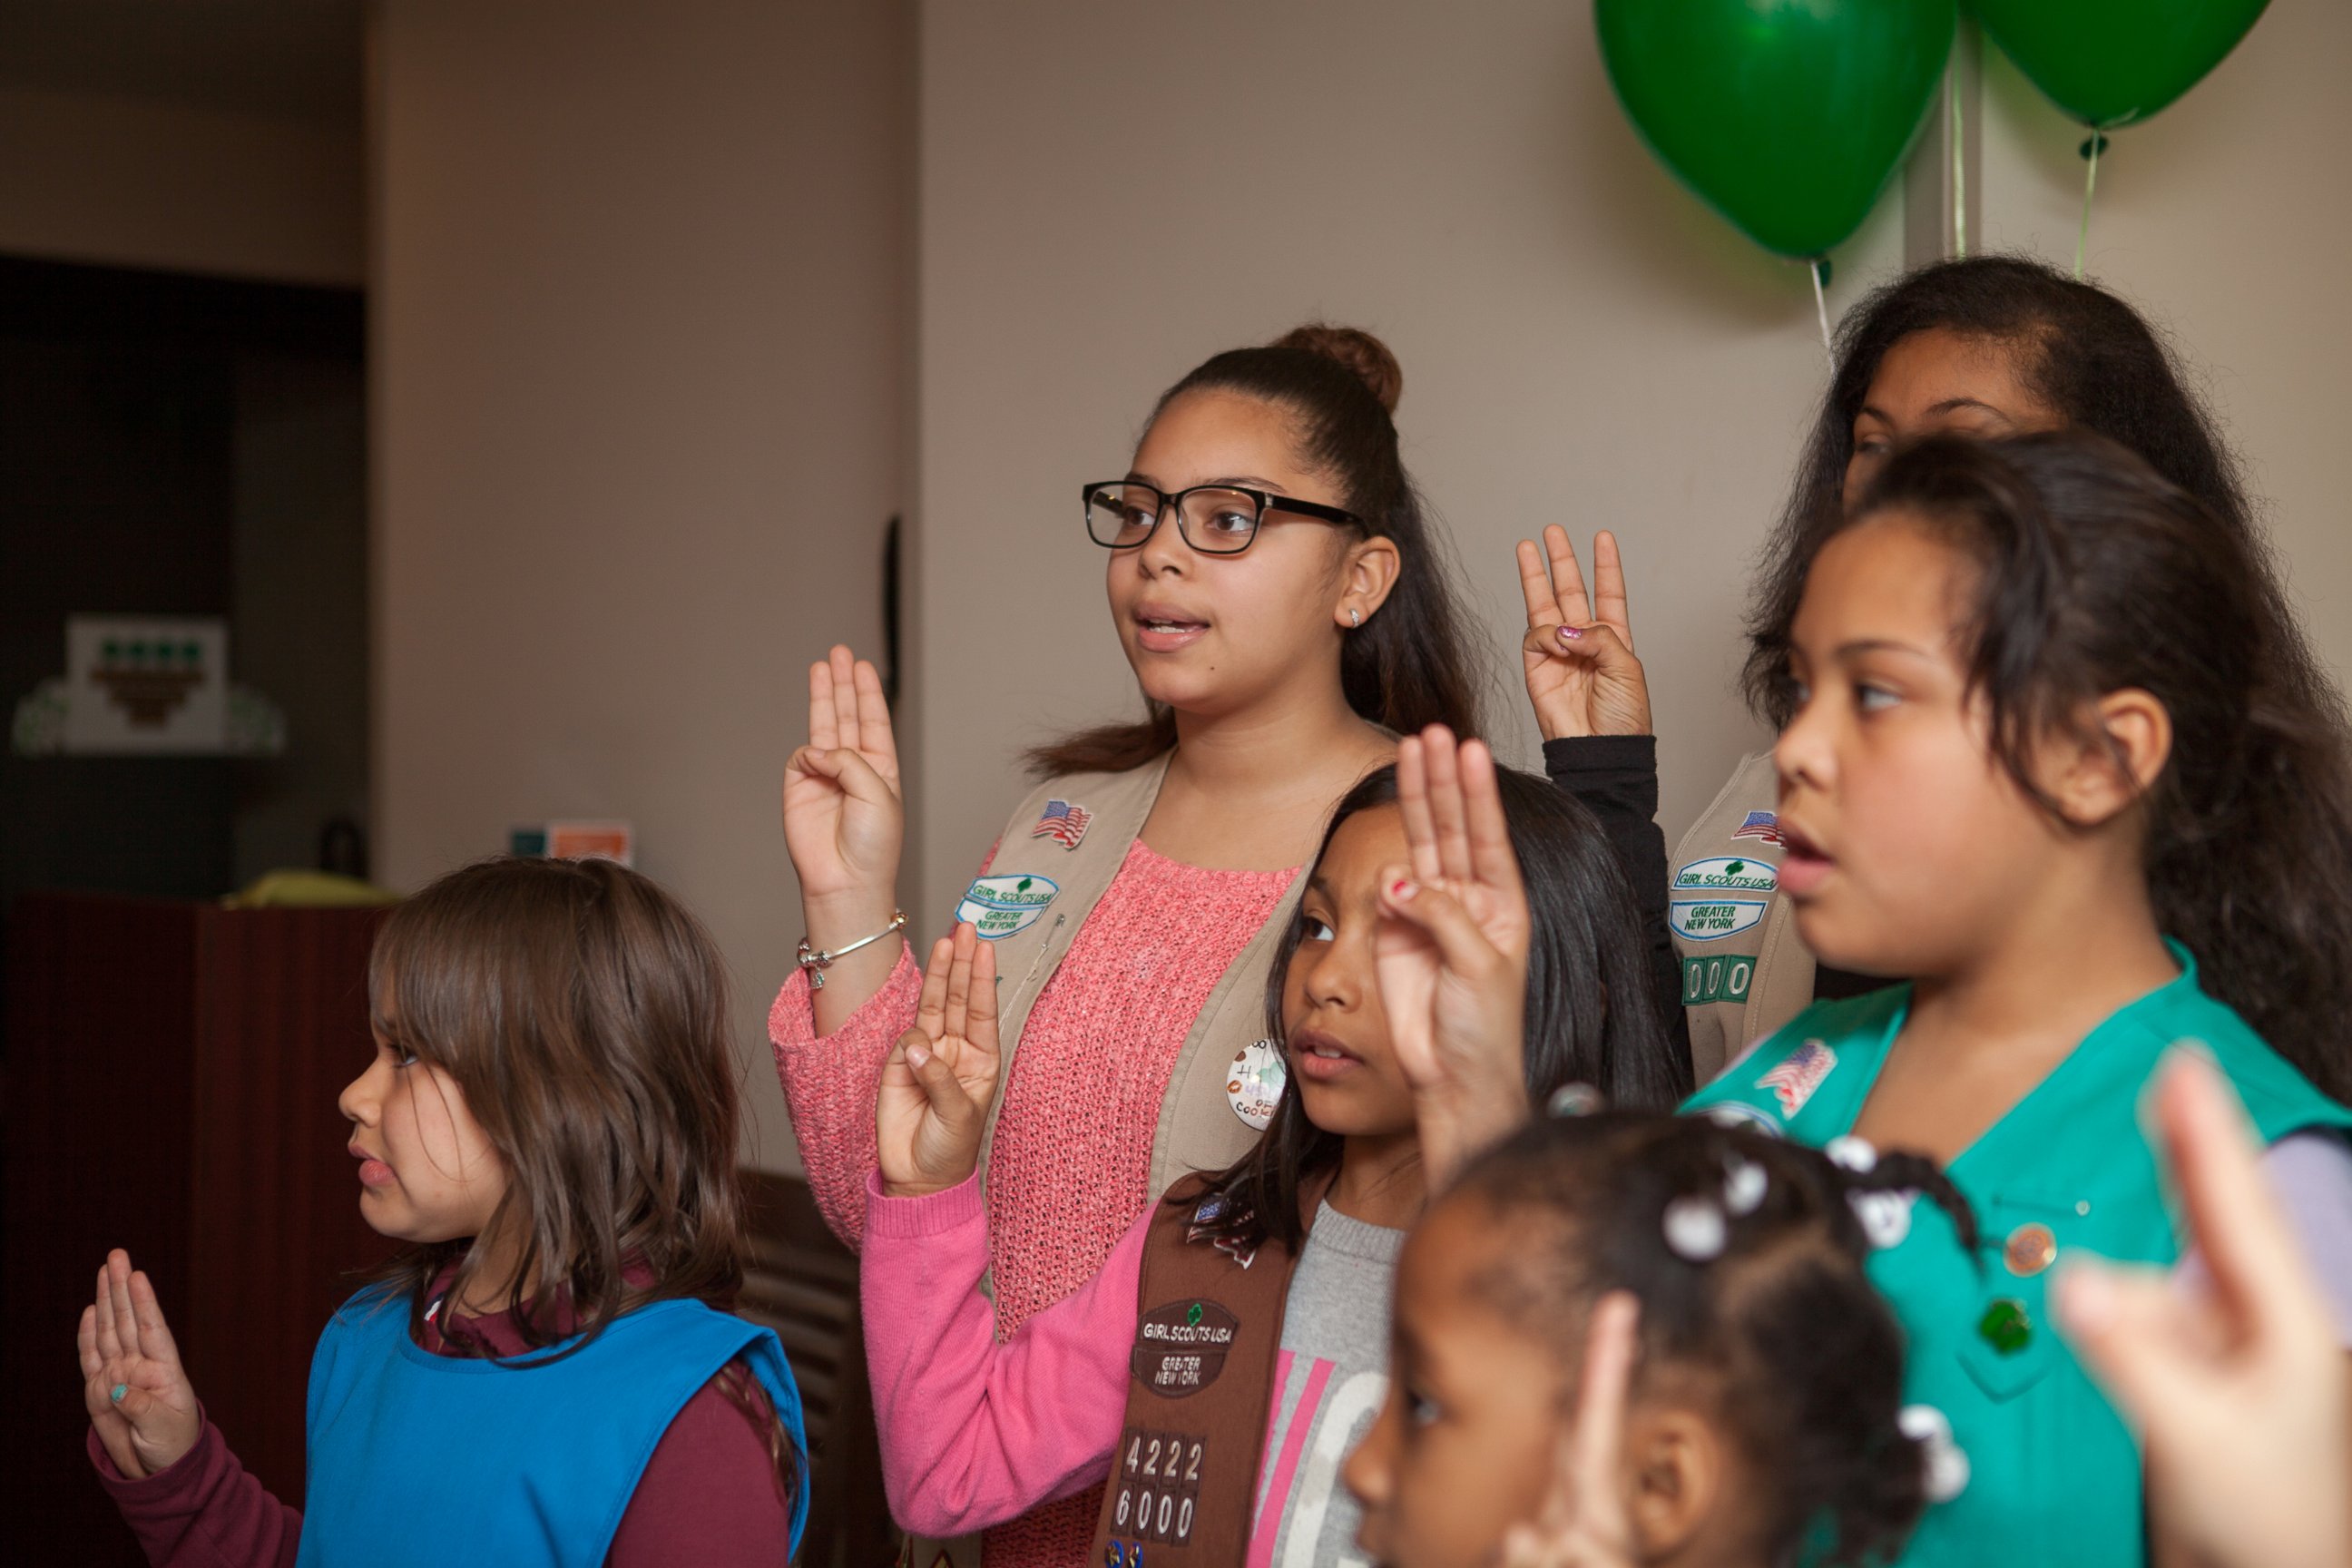 PHOTO: Girl Scout Troop 6000 is the first single unit troop that services homeless girls and women in the New York area.